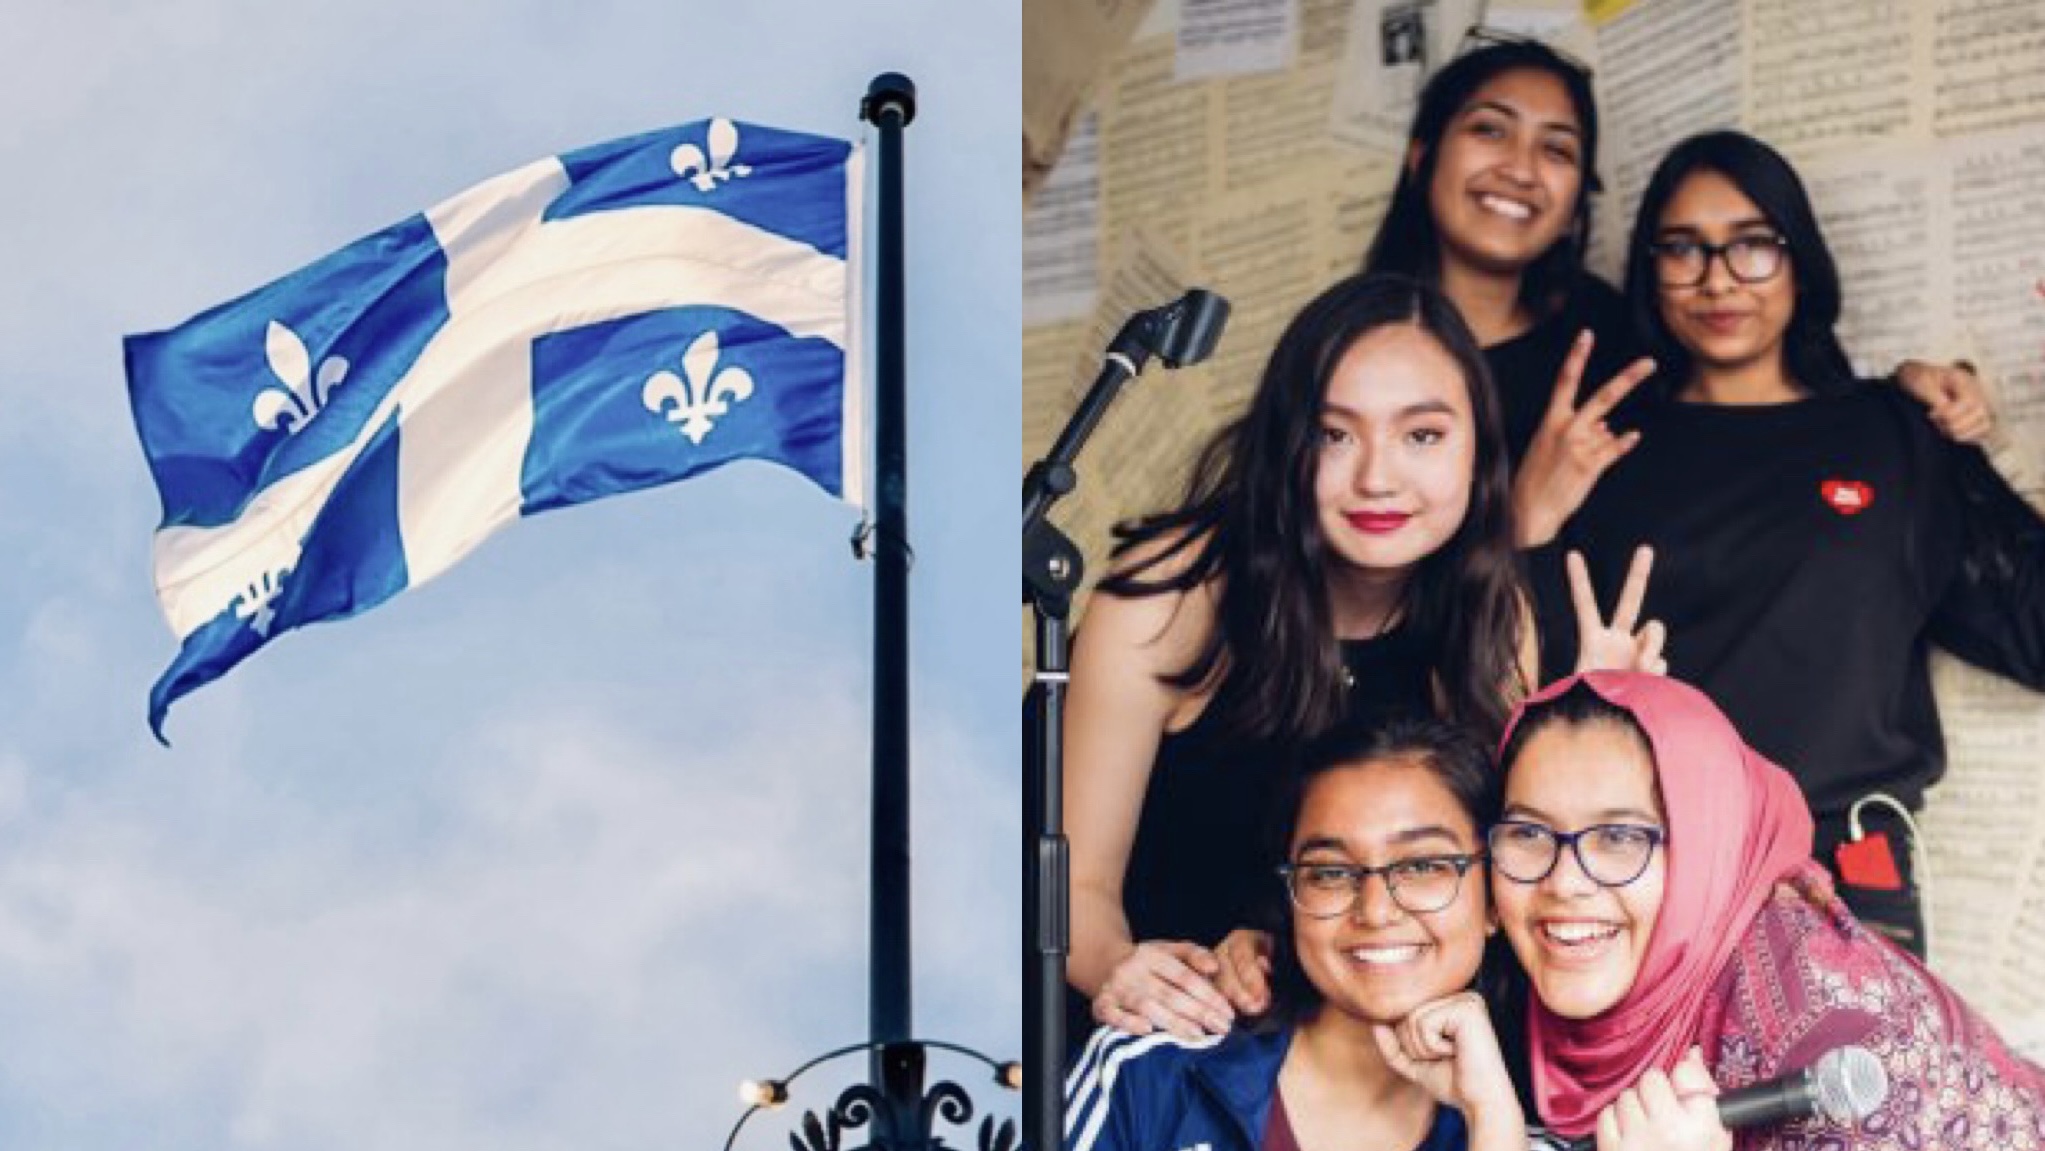 Montreal’s South Asian English-speaking women are full-fledged Quebecers, too